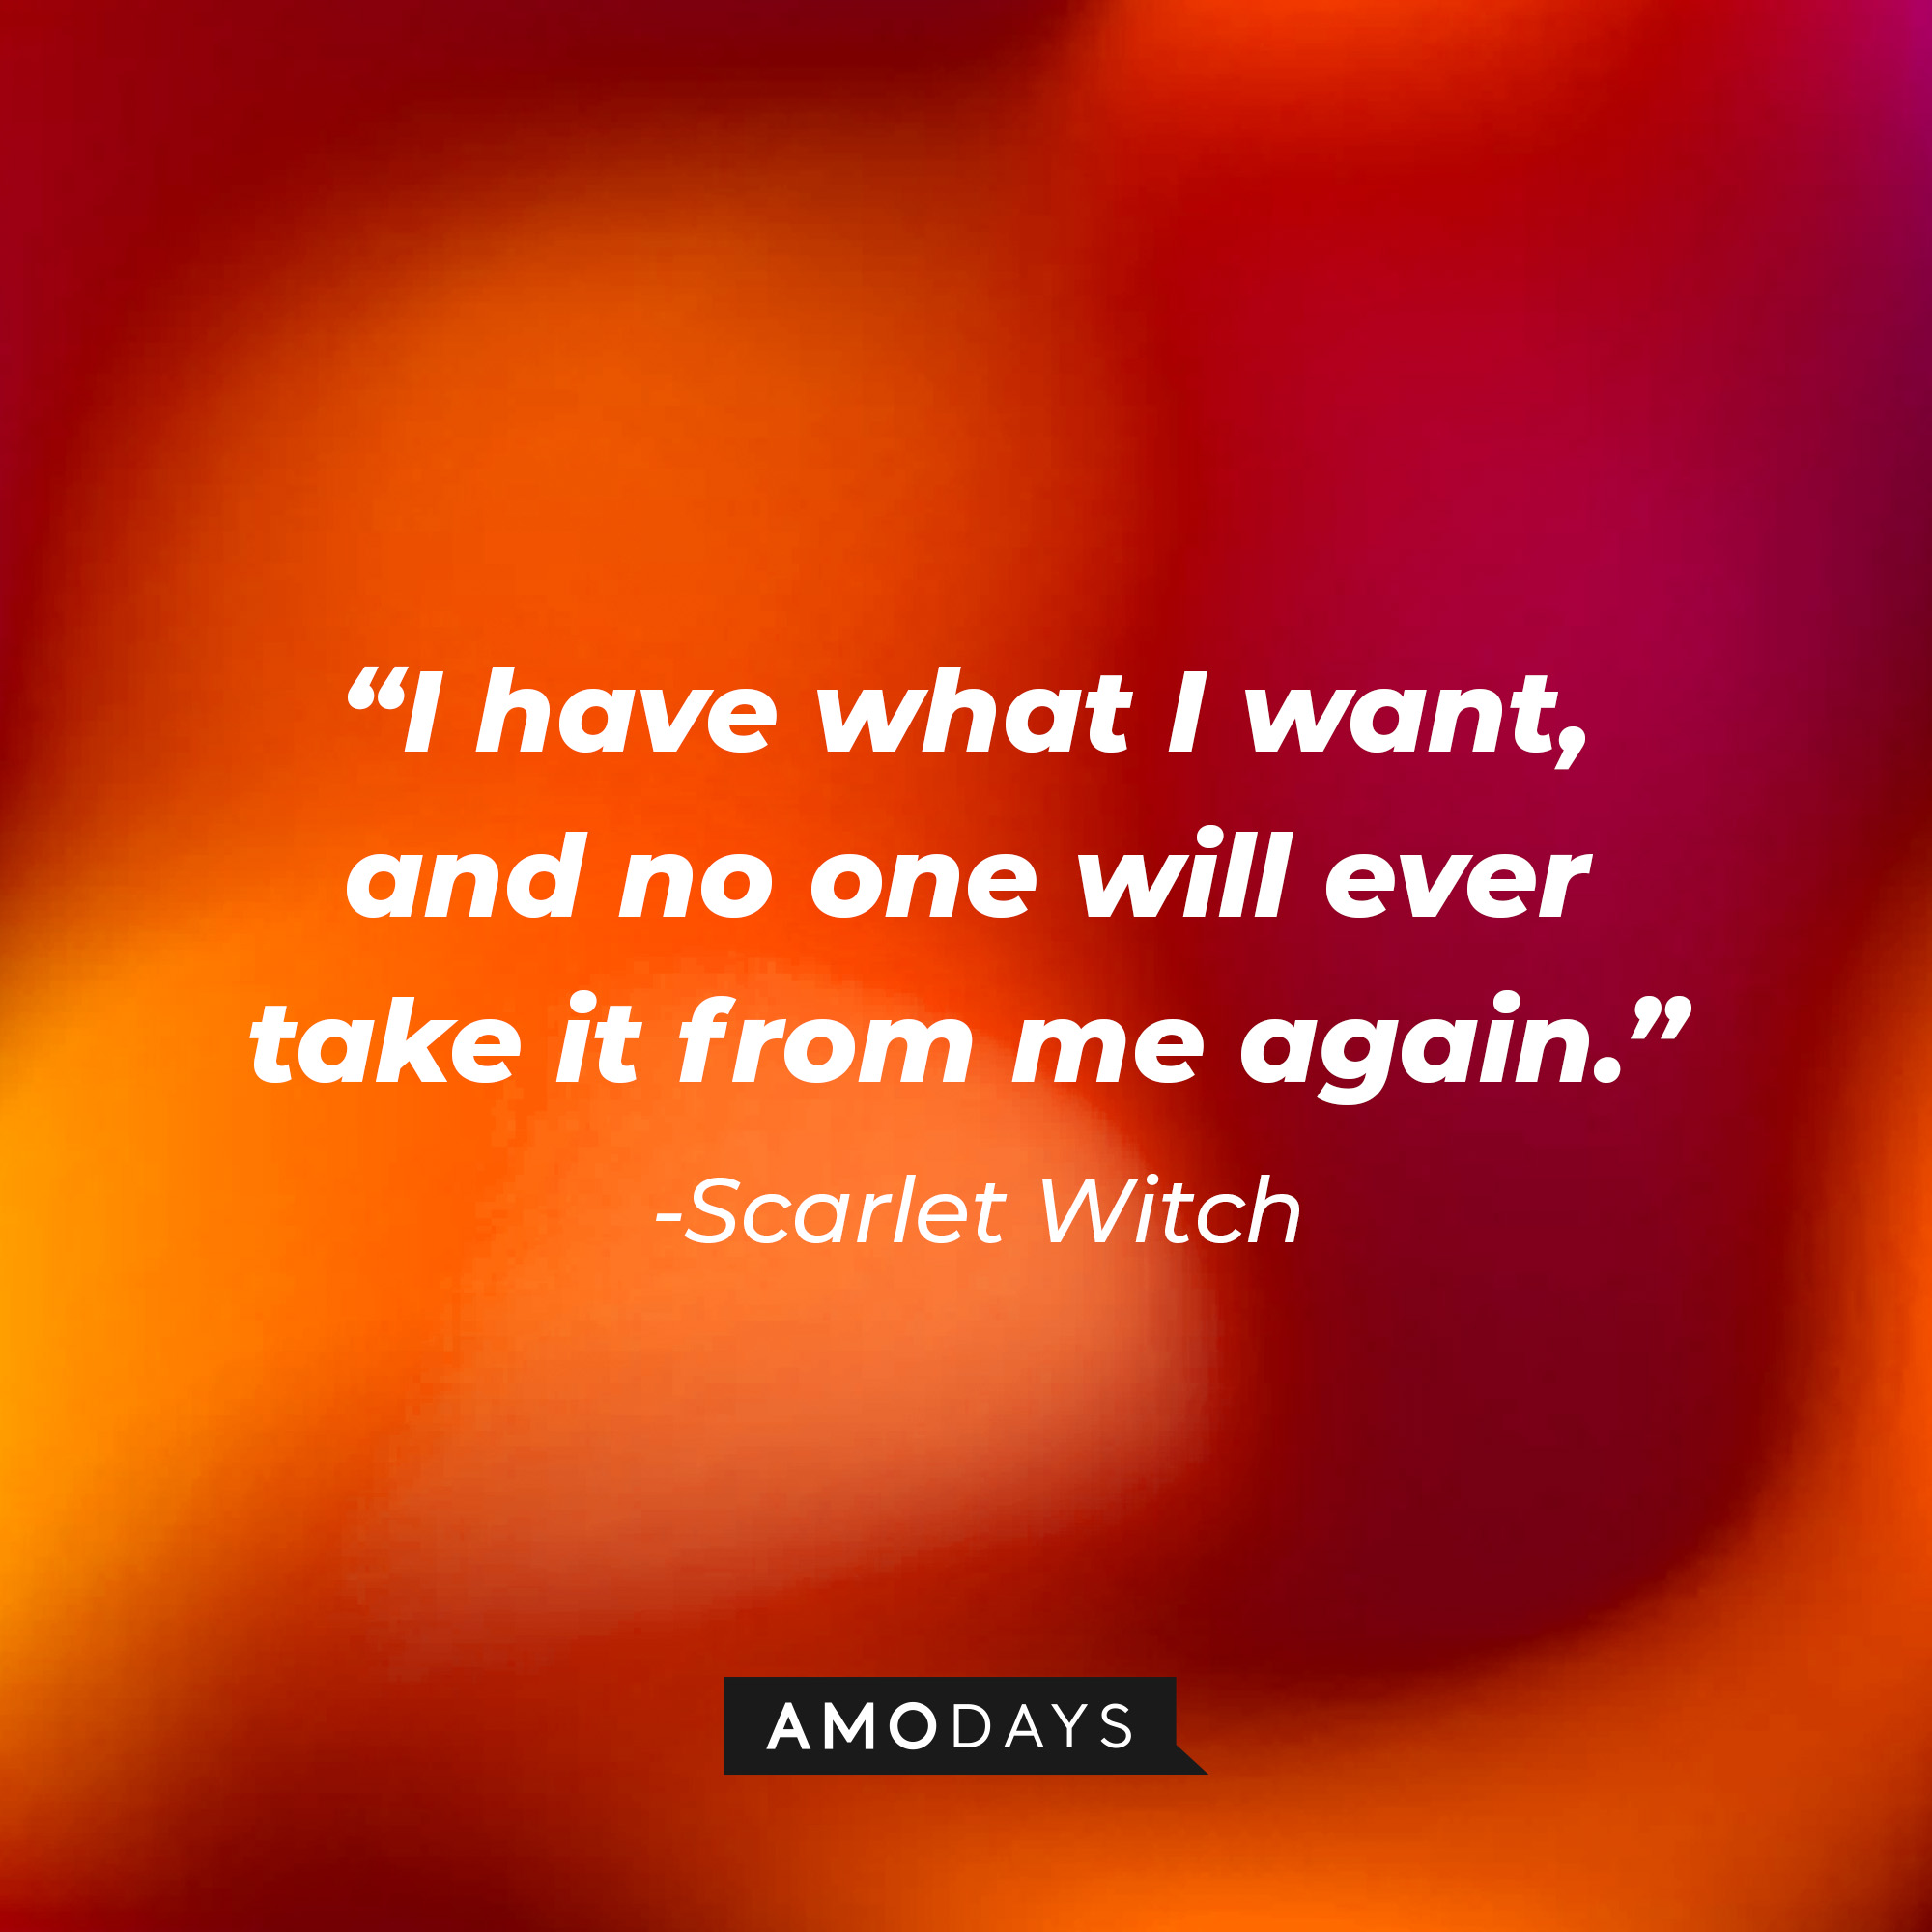 Scarlet Witch’s quote: "I have what I want, and no one will ever take it from me again." | Source: AmoDays